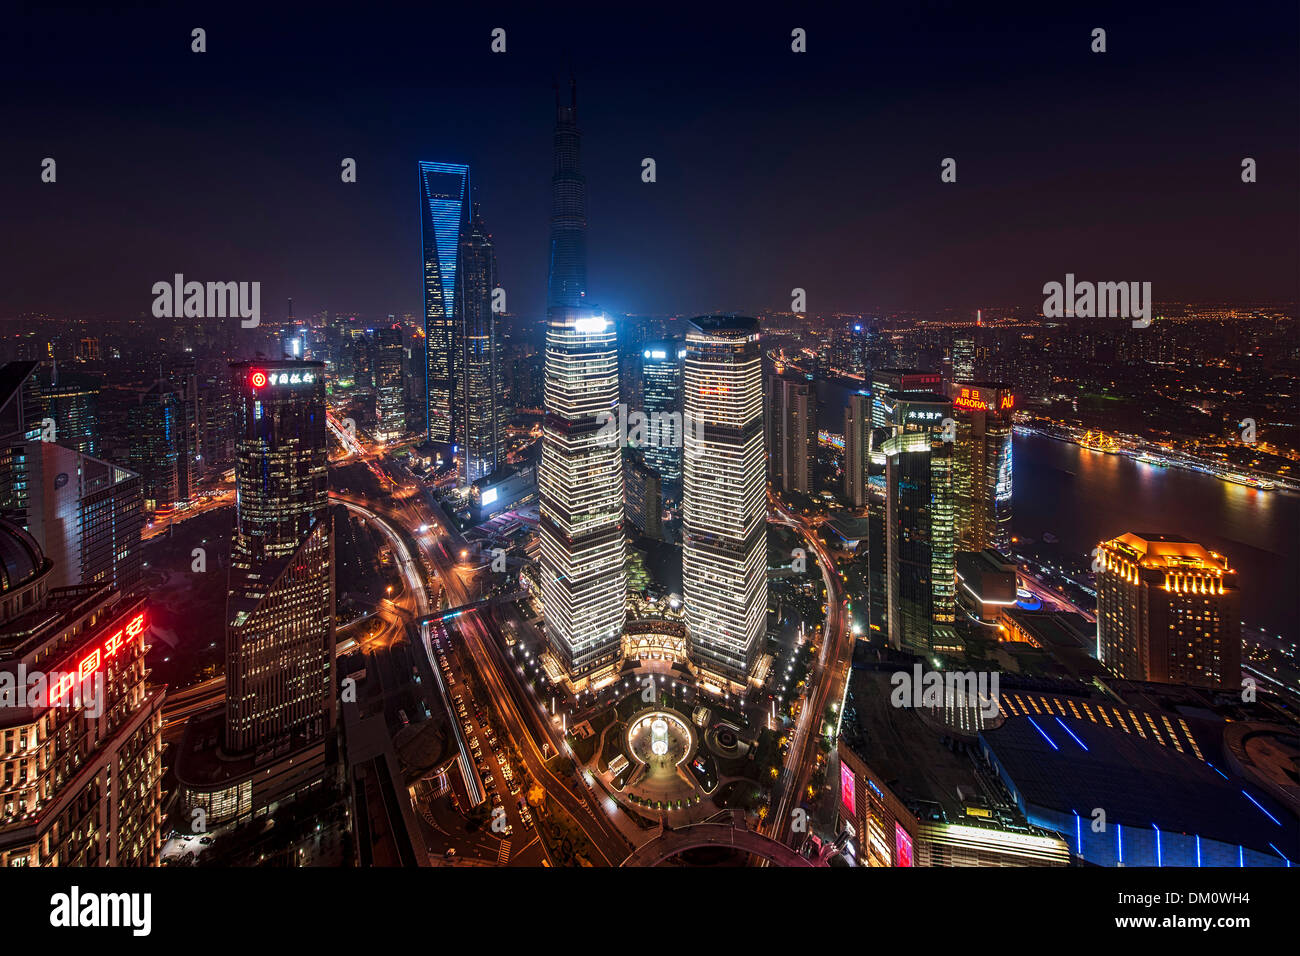 Cityscape, view of IFC, SWFC, Shanghai World Financial Center, Jin Mao Tower at night, Lujiazui, Pudong, Shanghai, China Stock Photo